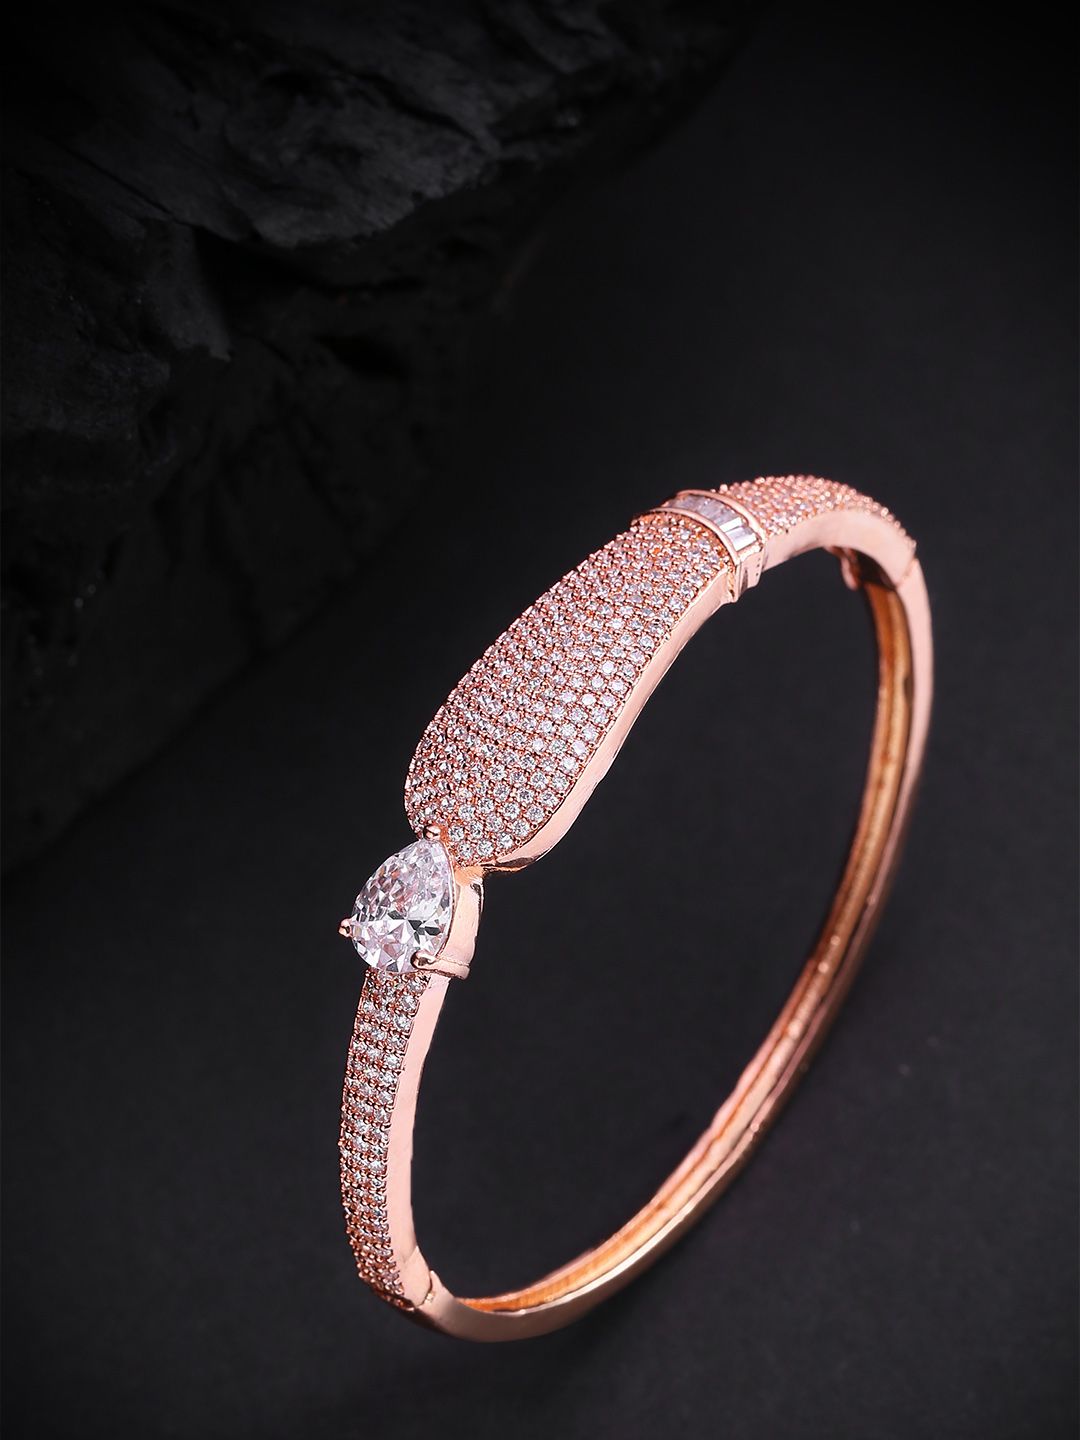 Priyaasi Rose Gold-Plated Stone Studded Handcrafted Bangle Style Bracelet Price in India